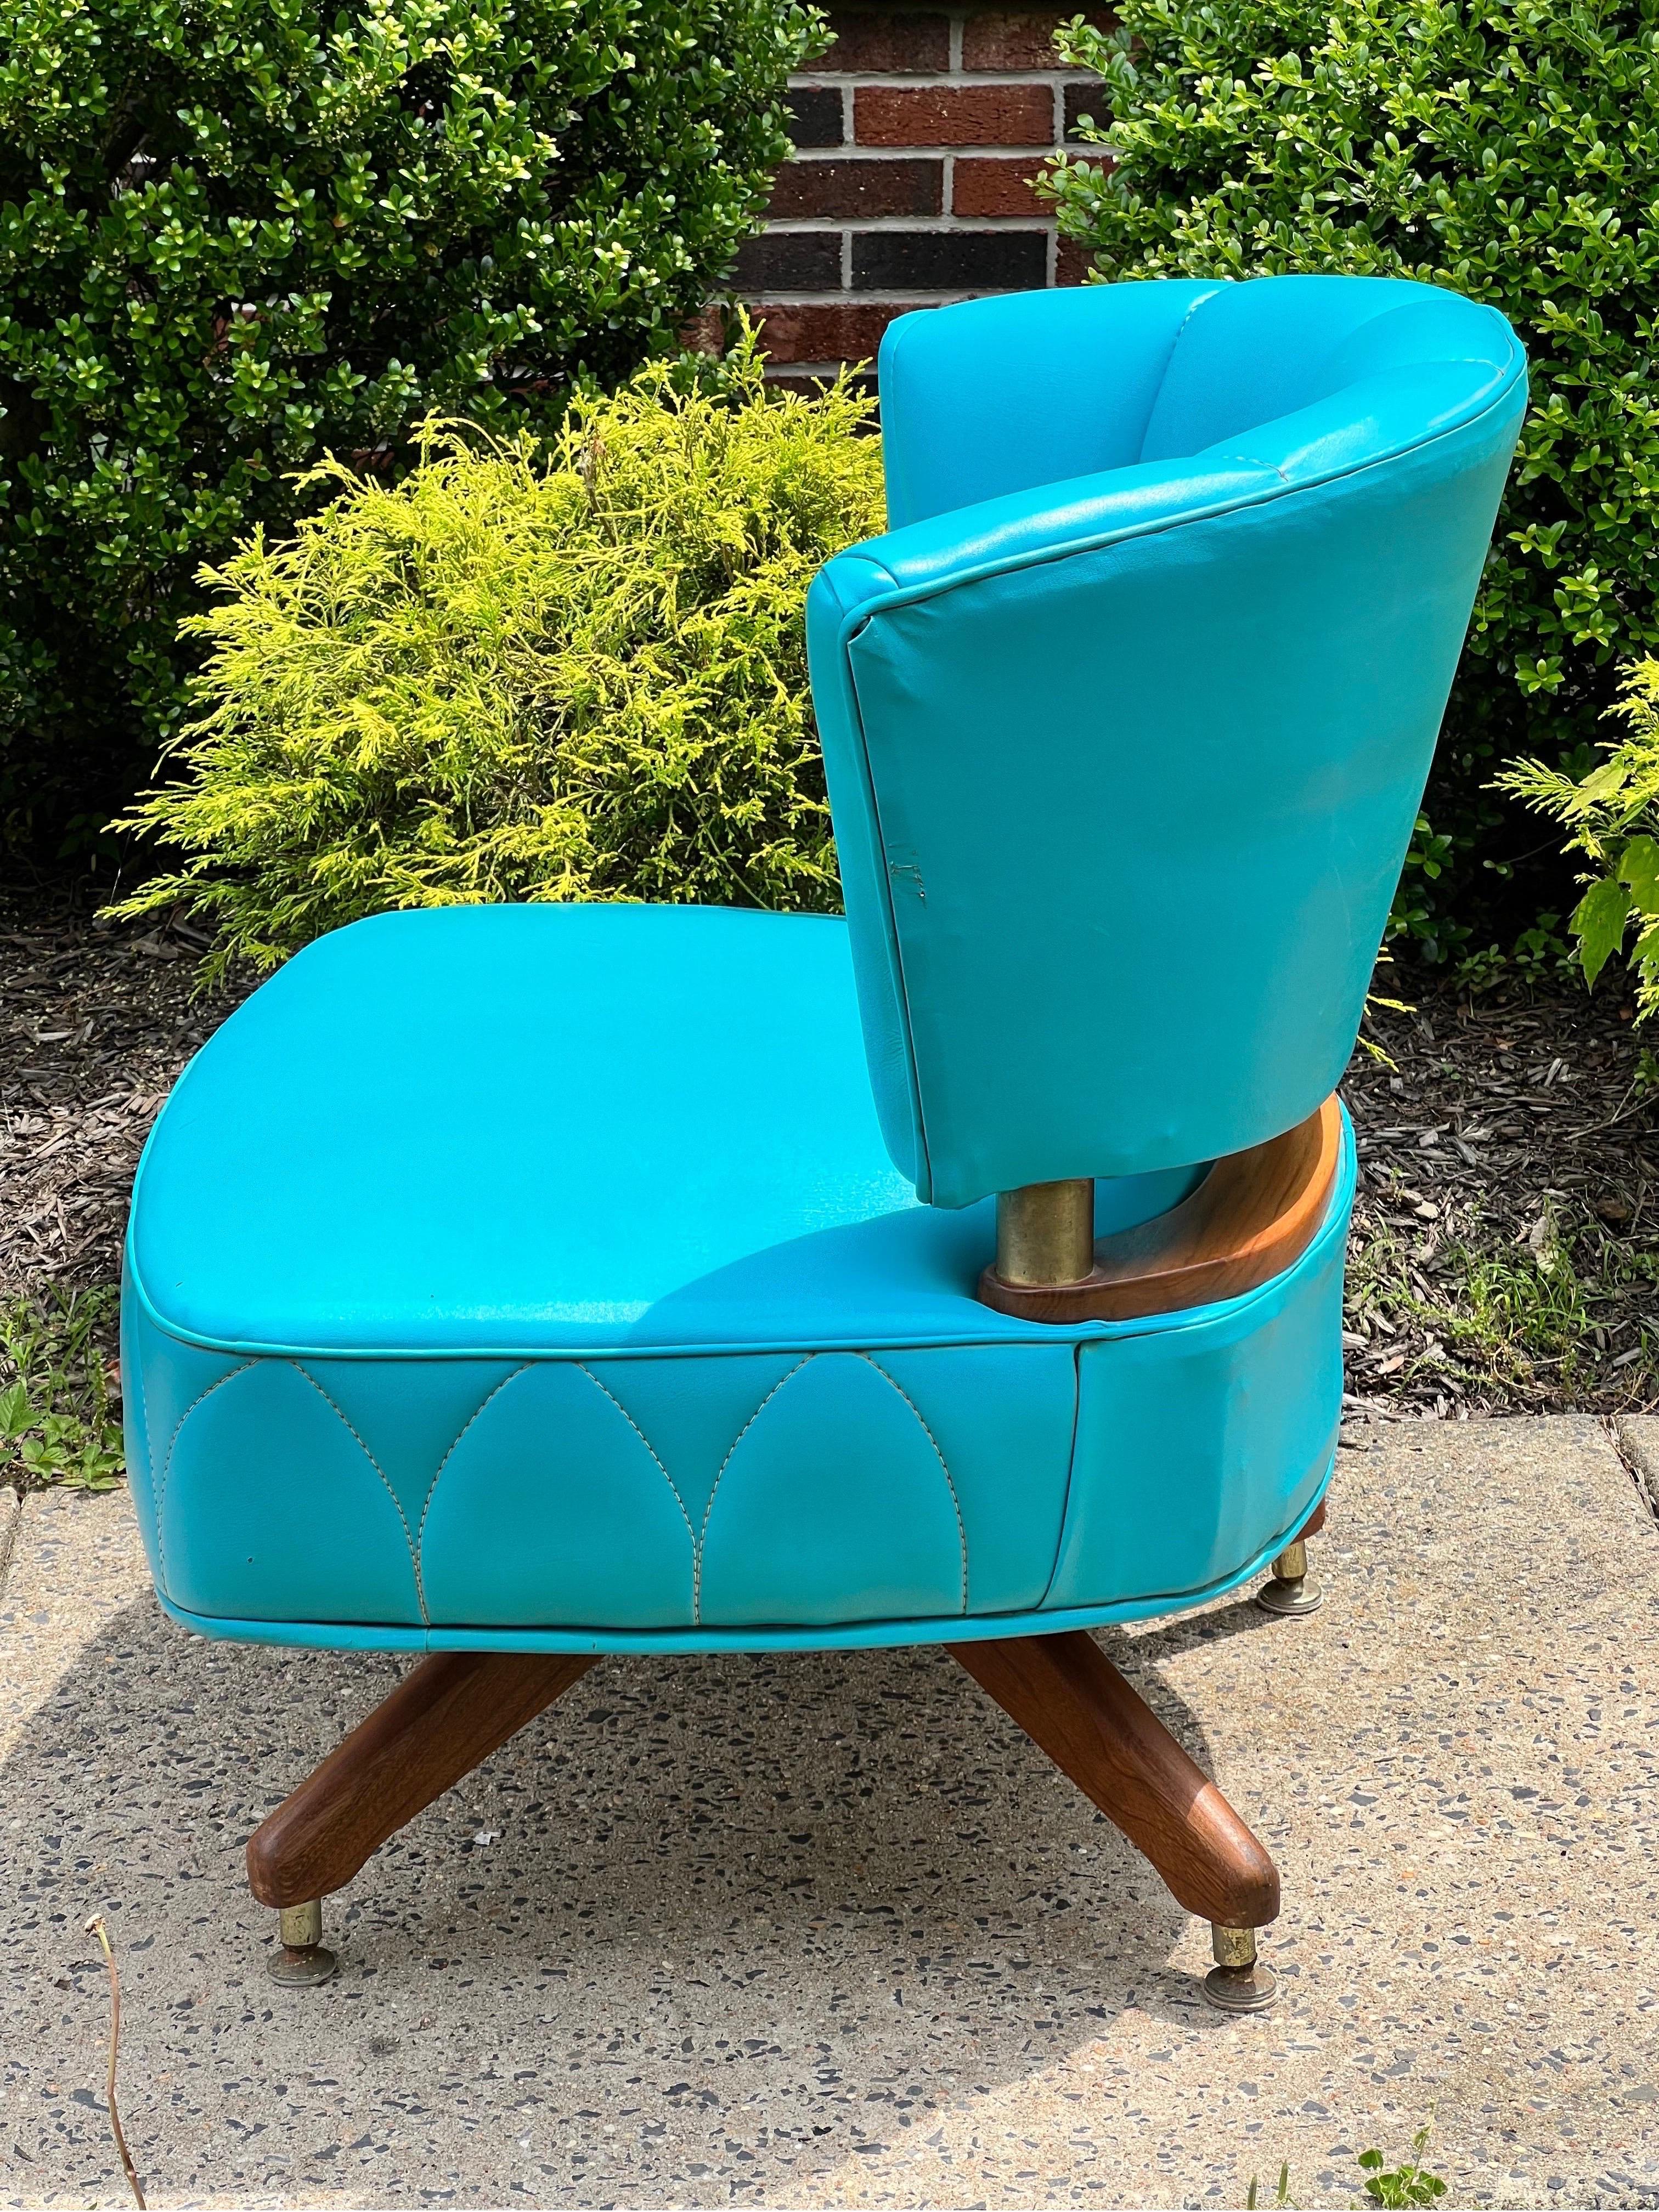 Fabulous vintage swivel slipper chair by Kroehler, 1962.

A beautiful chair upholstered in a vibrant shade of turquoise faux leather with unique stitching pattern detail. The upholstery color has maintained its vitality and has no fading. A generous